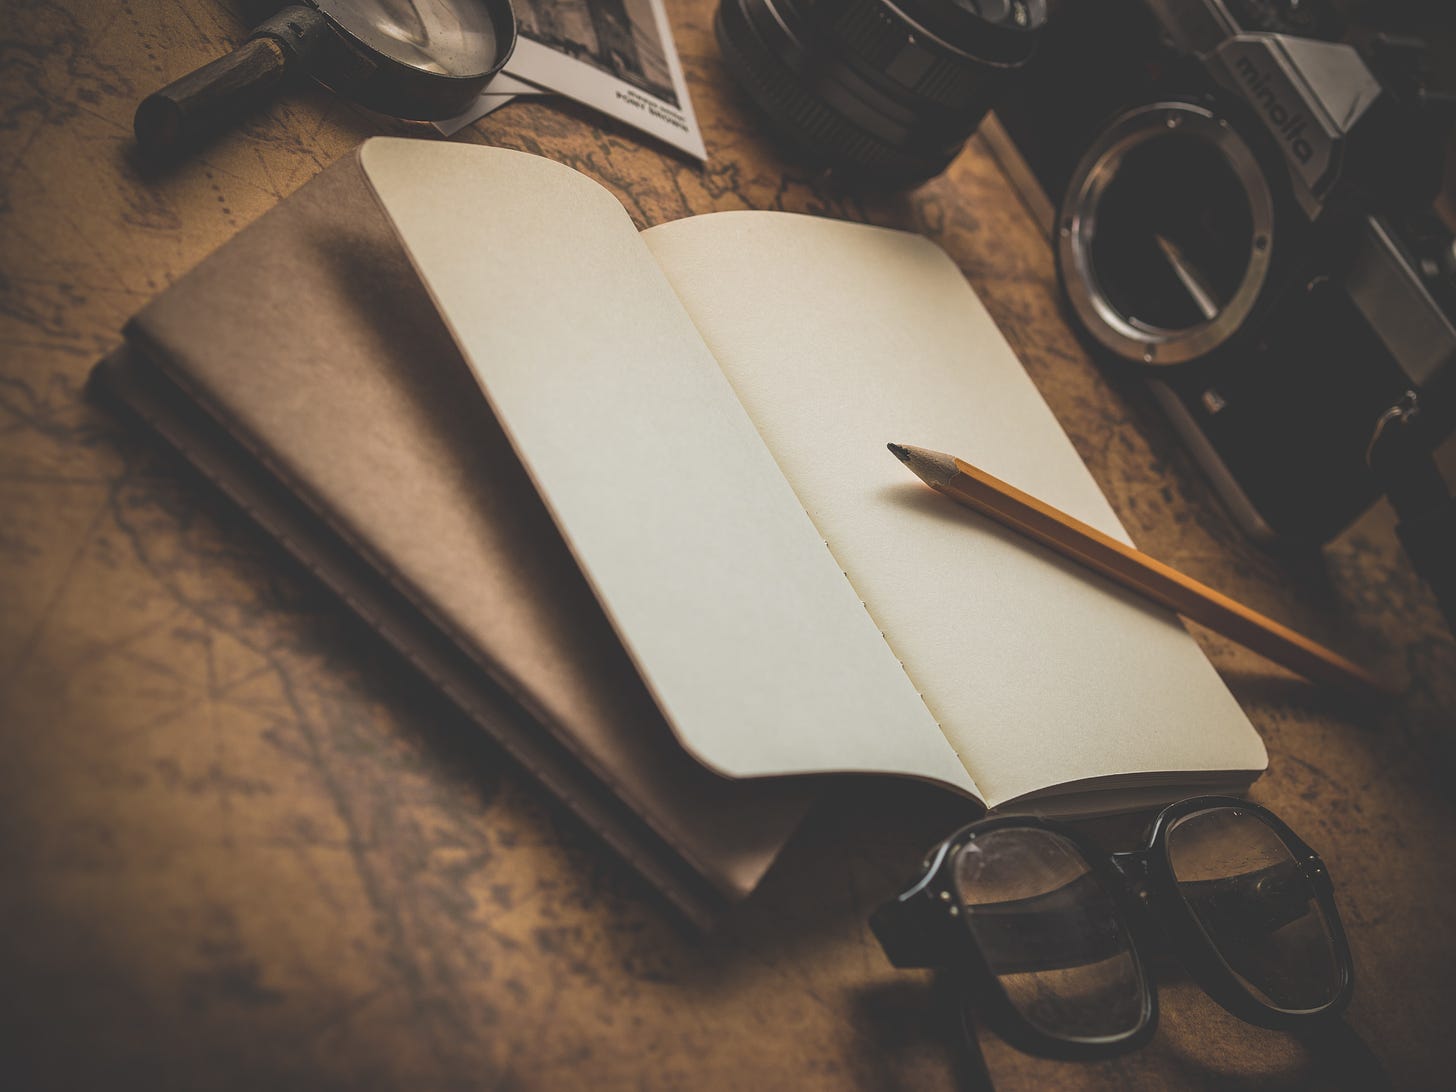 Image is a photo of an open notebook with blank pages atop a folder and a map, surrounded by various objects like a magnifying glass, an old manual camera, a pencil, and glasses.